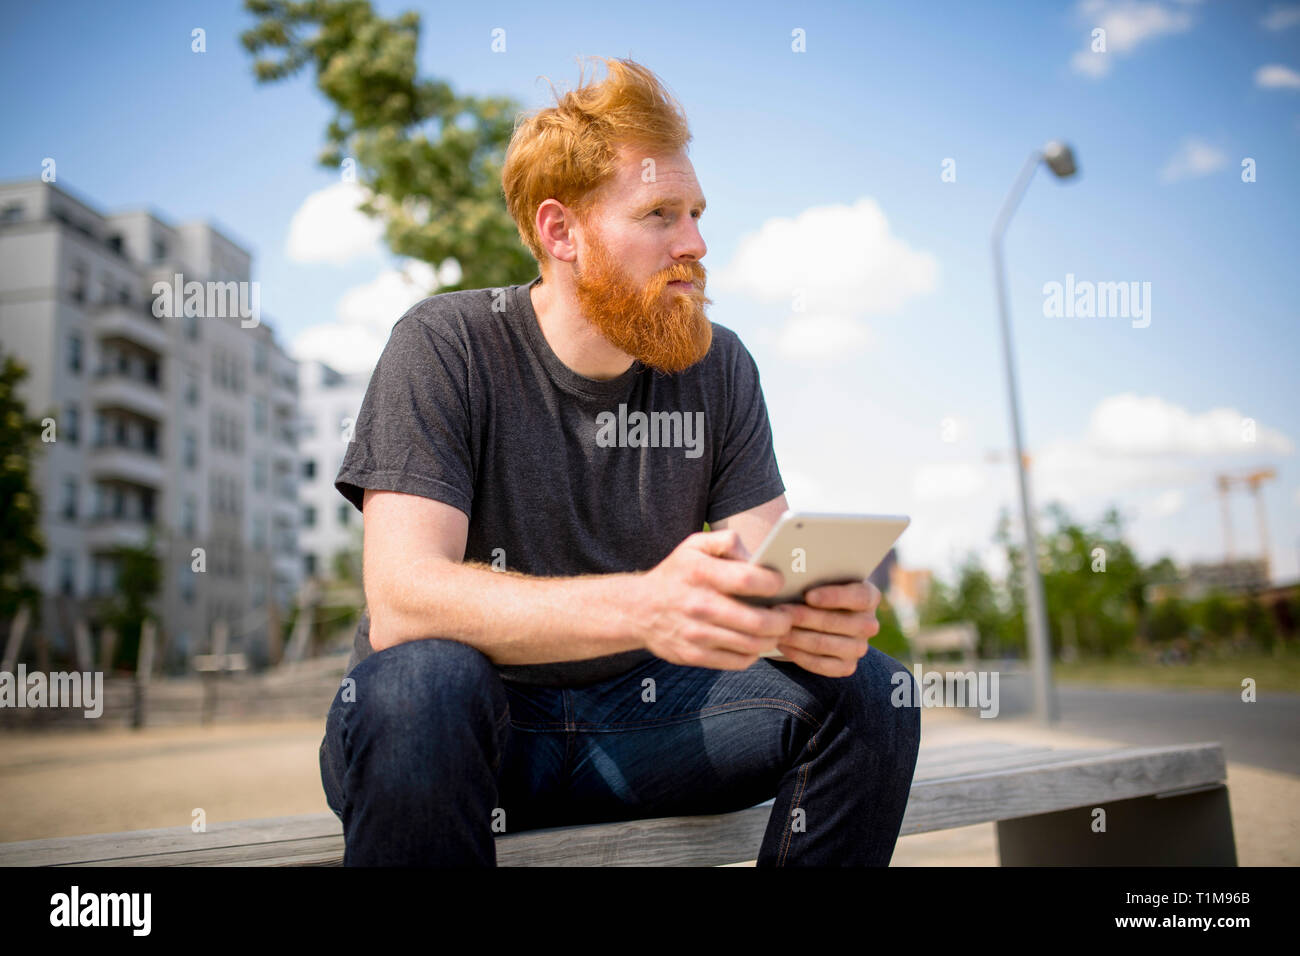 Hipster man with beard using digital tablet on urban bench Stock Photo